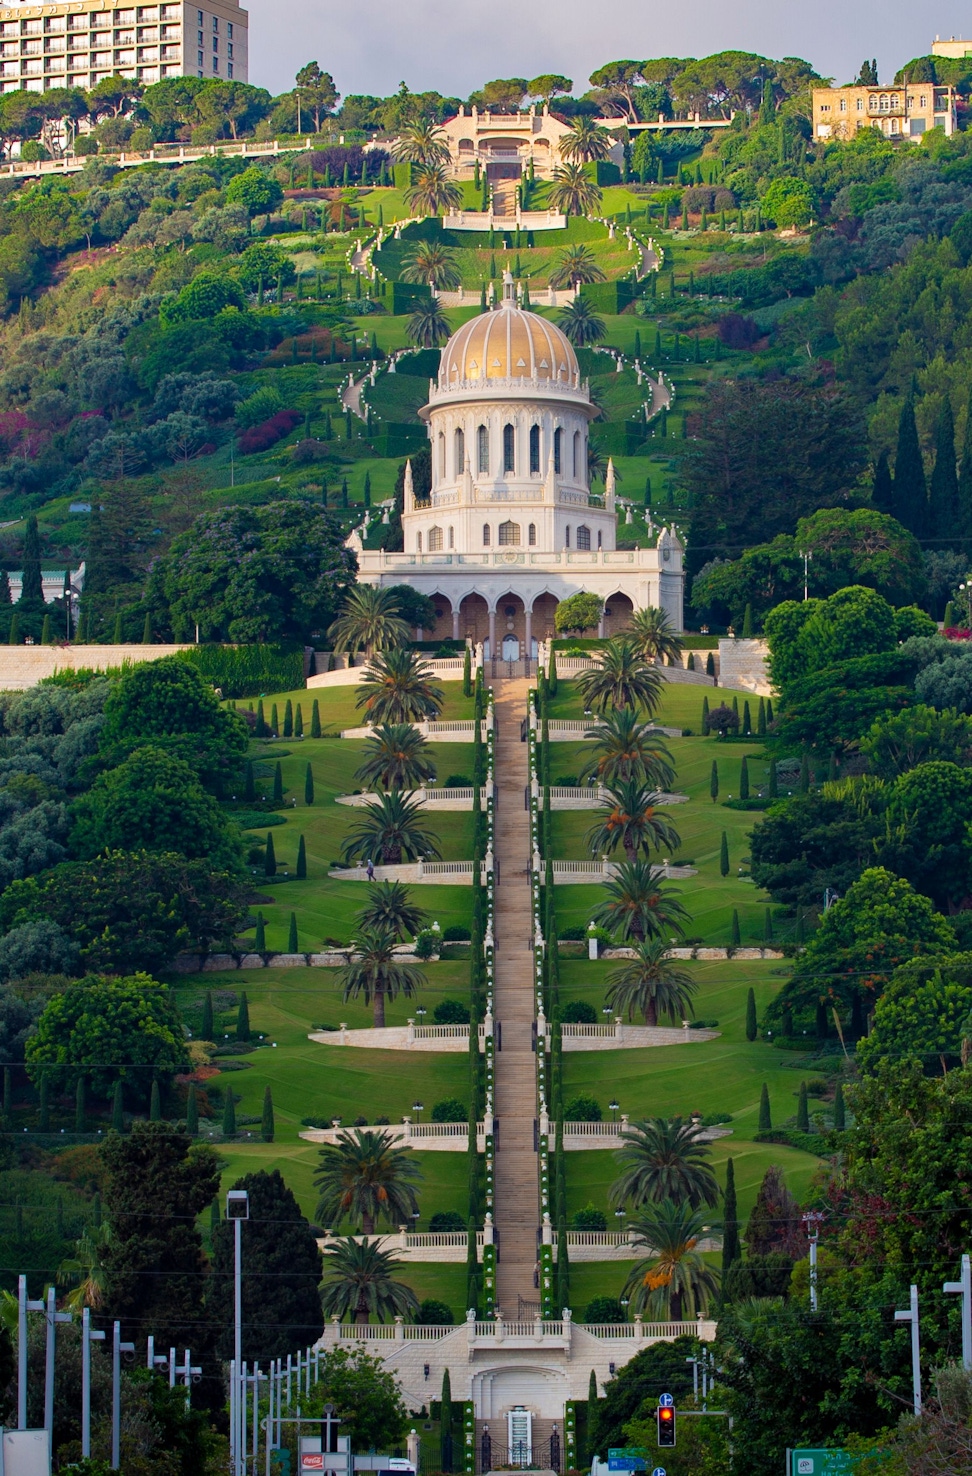 The Shrine of the Báb sits in the middle of 19 magnificent terraces on Mt. Carmel in Haifa.